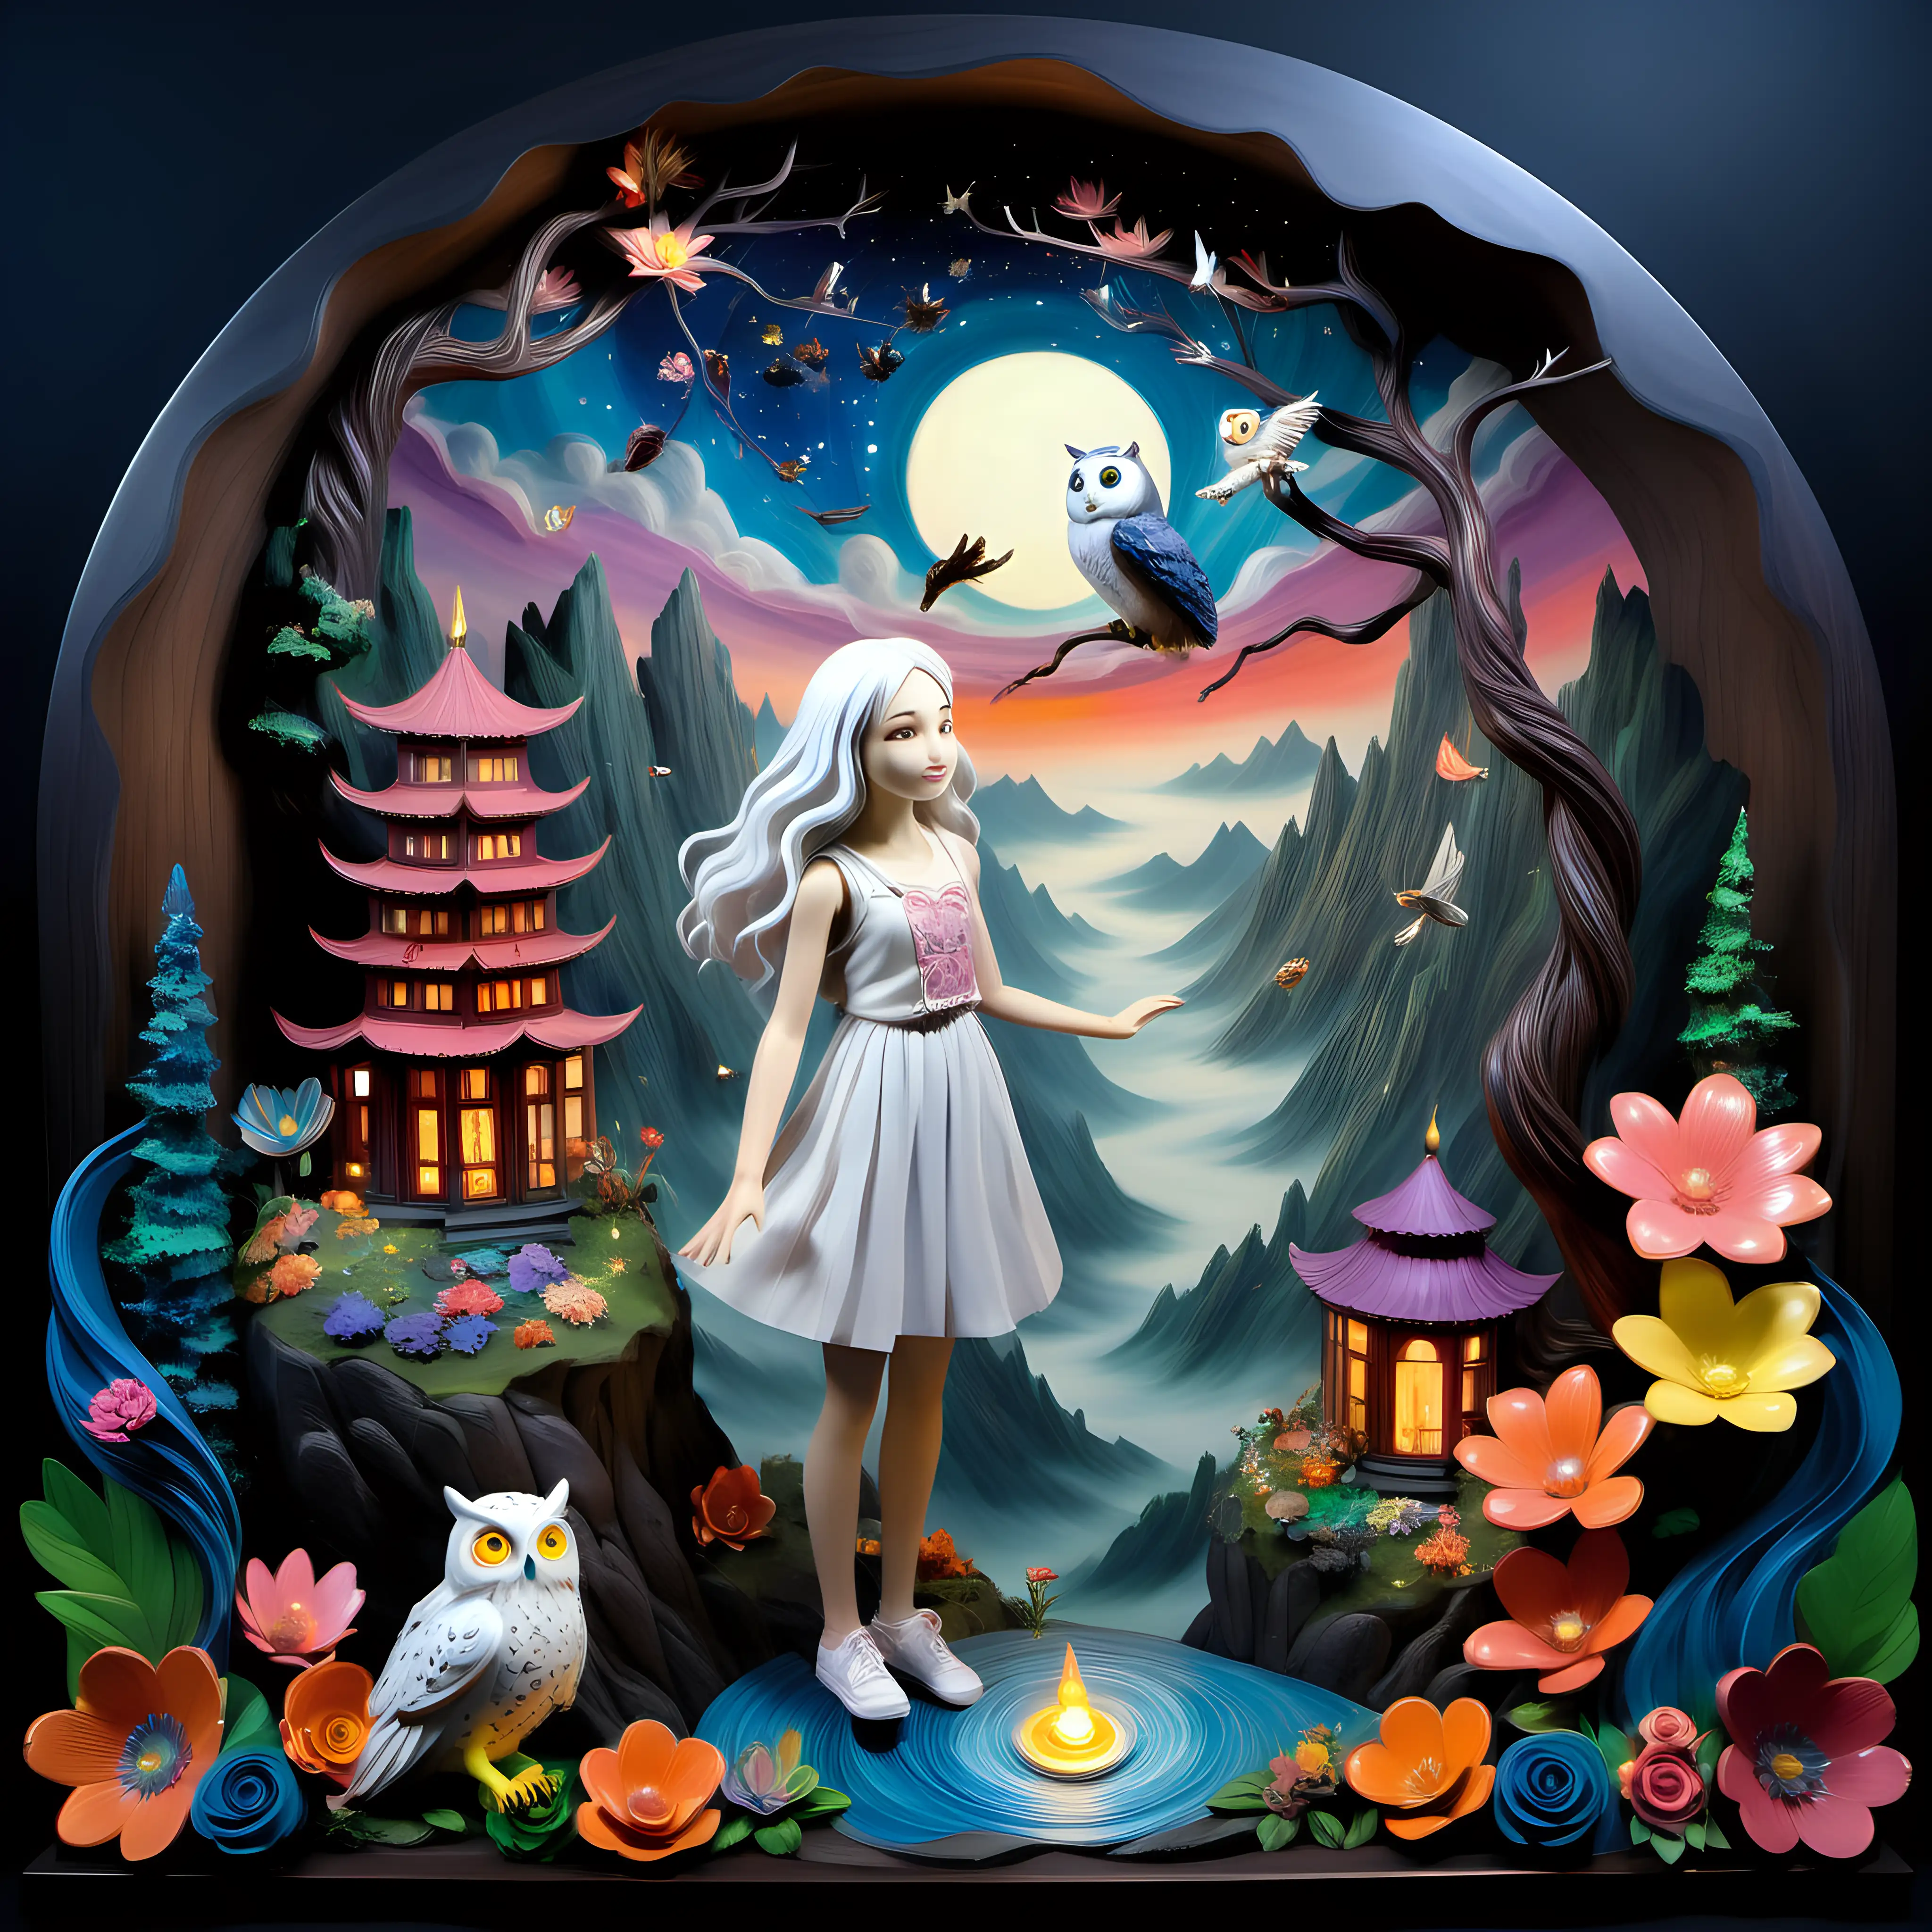 DIORAMA, ghibli inspired painting of beautiful enchanting slender, white-haired, wavy, 18 YEAR OLD girl who shape-shifts into an owl, owl princess, playing with a big colorful owl in an enchanted forest skyline, flowers, fireflies and moonlight, sea of clouds, mountain, temple, colorful, cliff